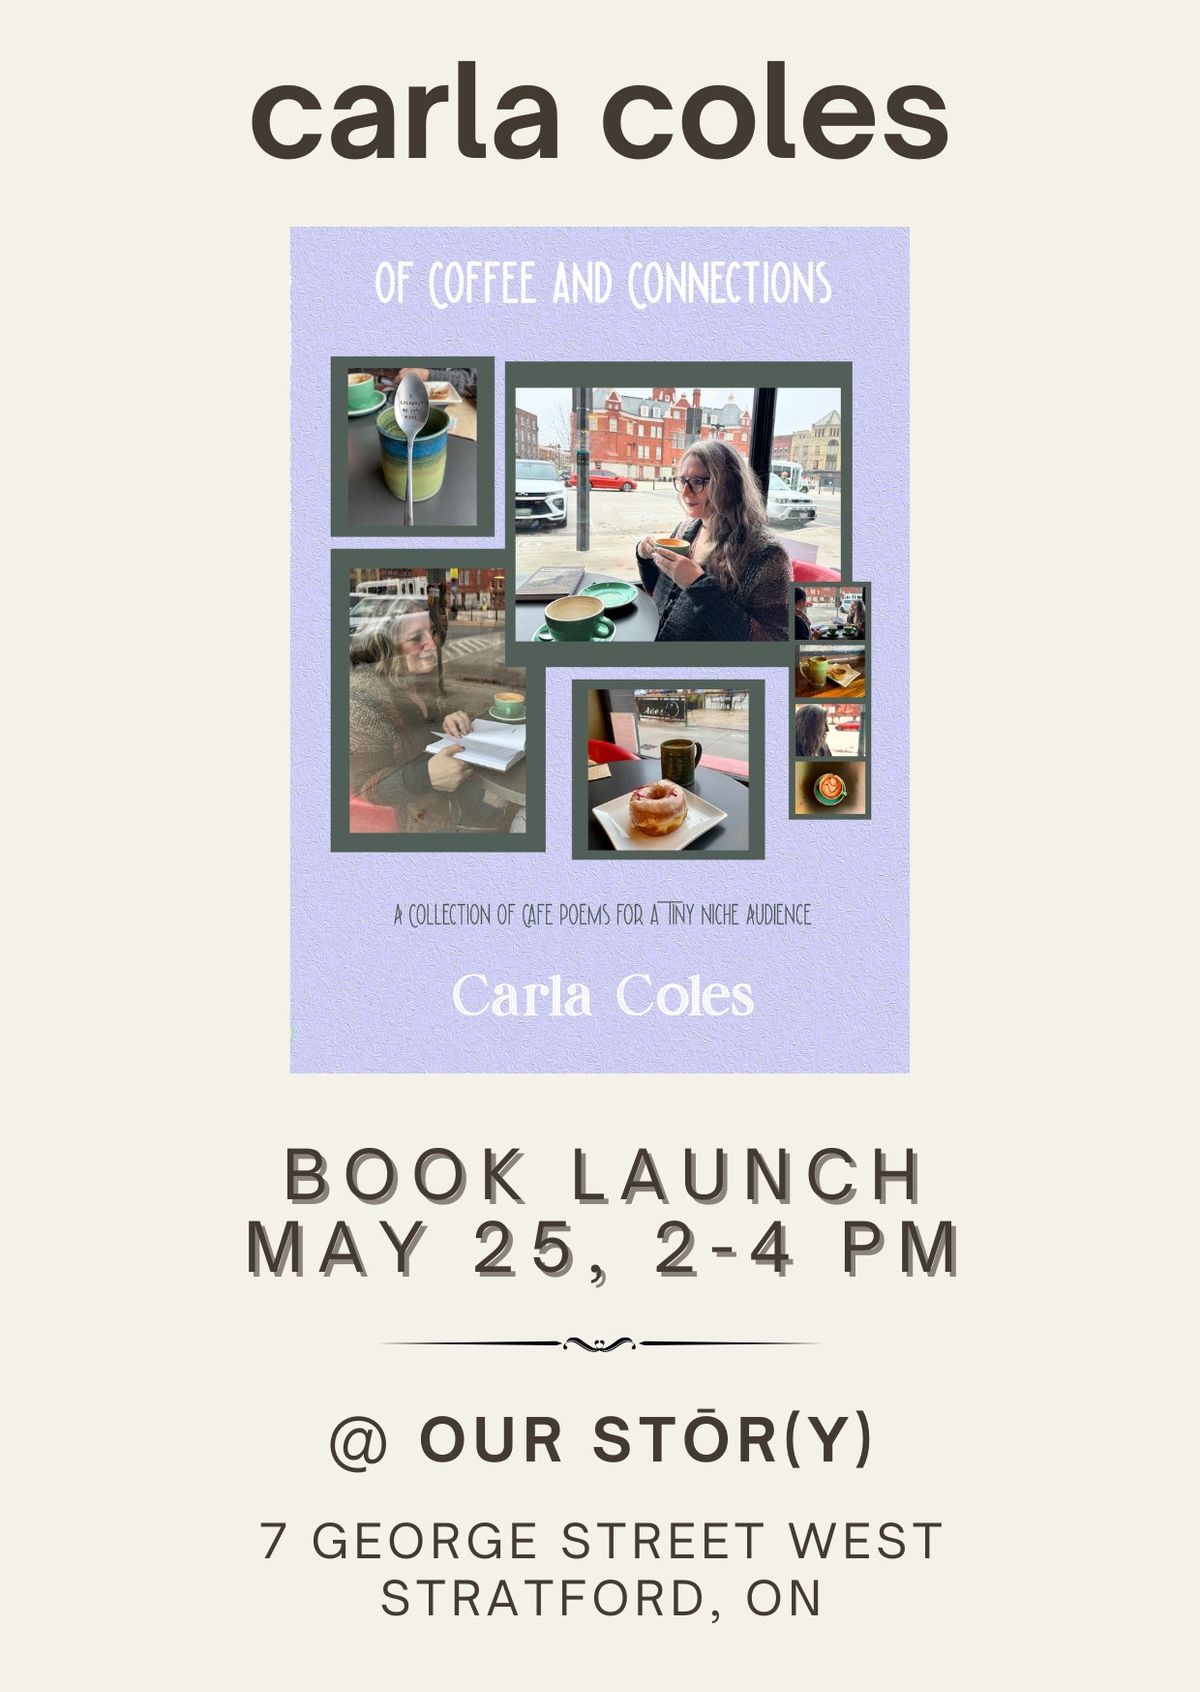 BOOK LAUNCH!! Carla Coles's new book, 'Of Coffee and Connections'